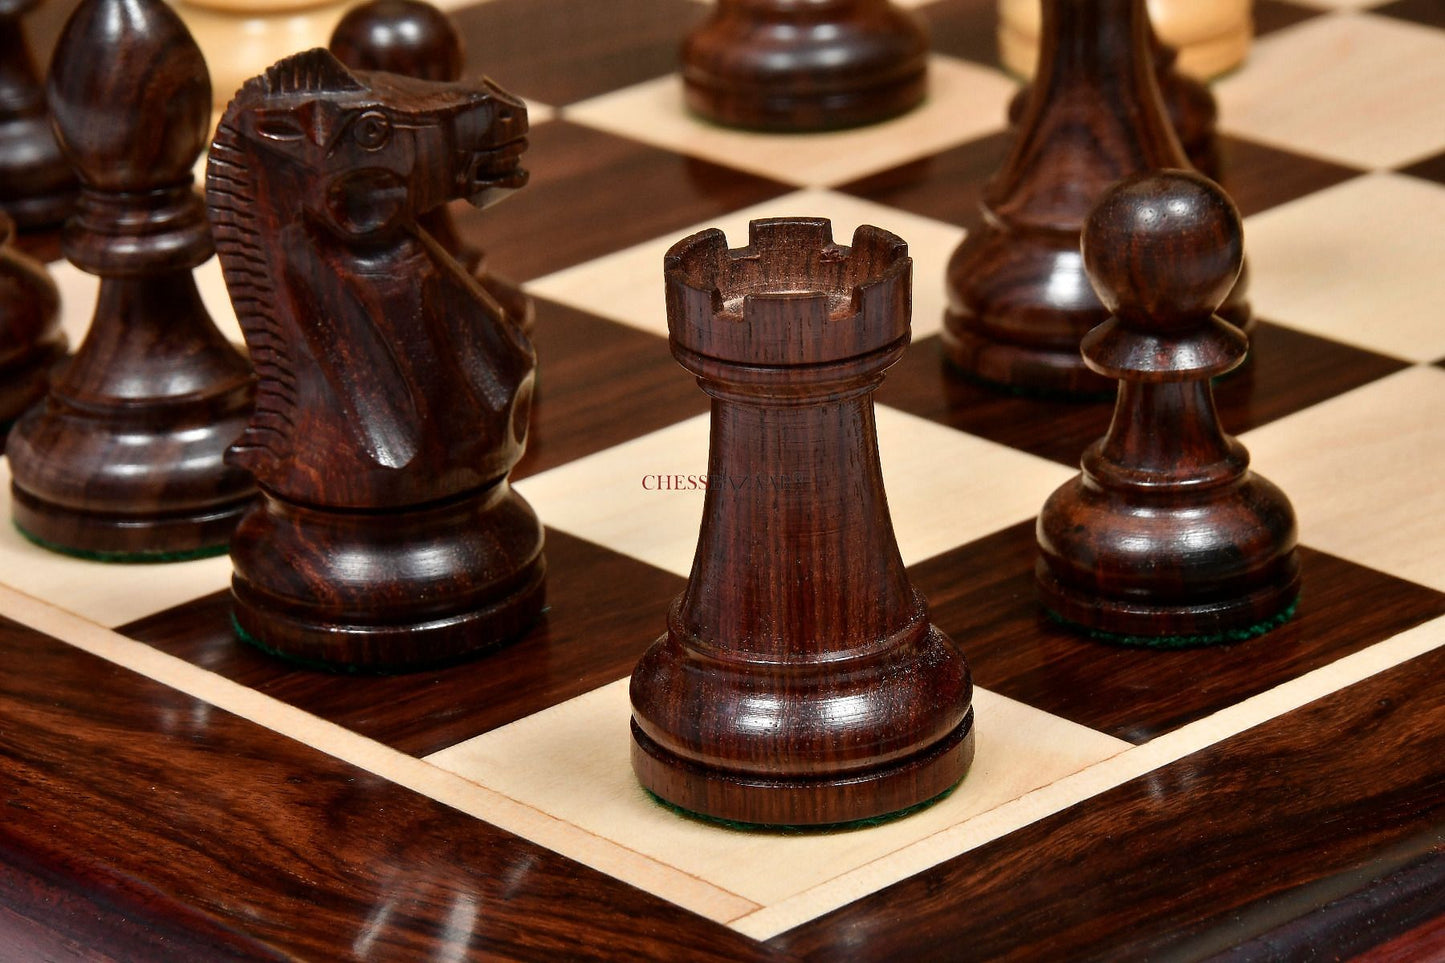 The American Staunton Series Weighted Tournament Chess Pieces in Rosewood & Box Wood - 4.1" King